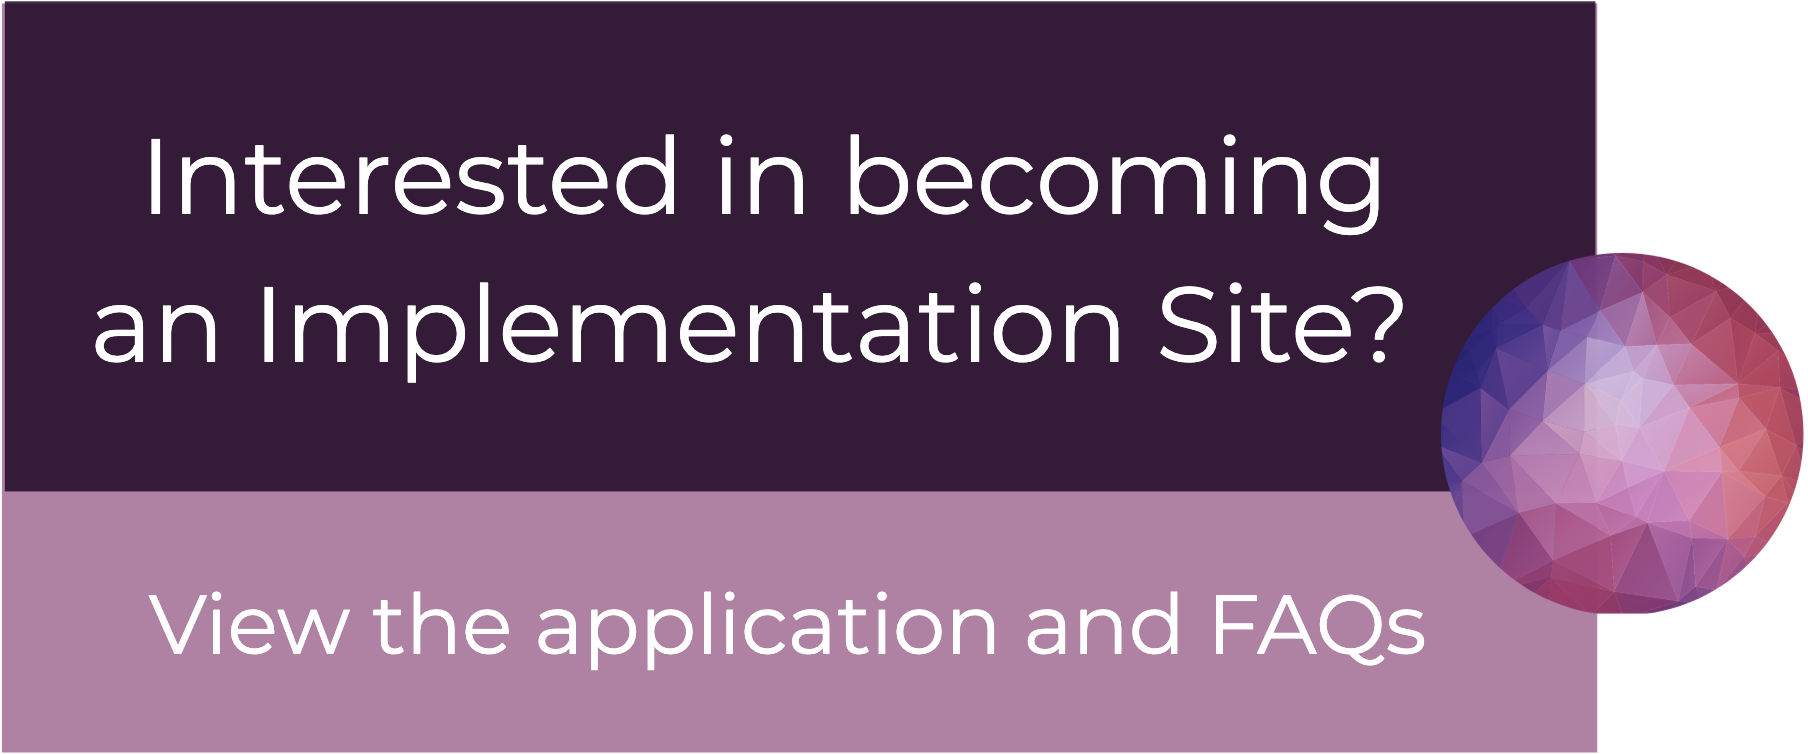 Interested in becoming an Implementation Site? Join our listserv for updates